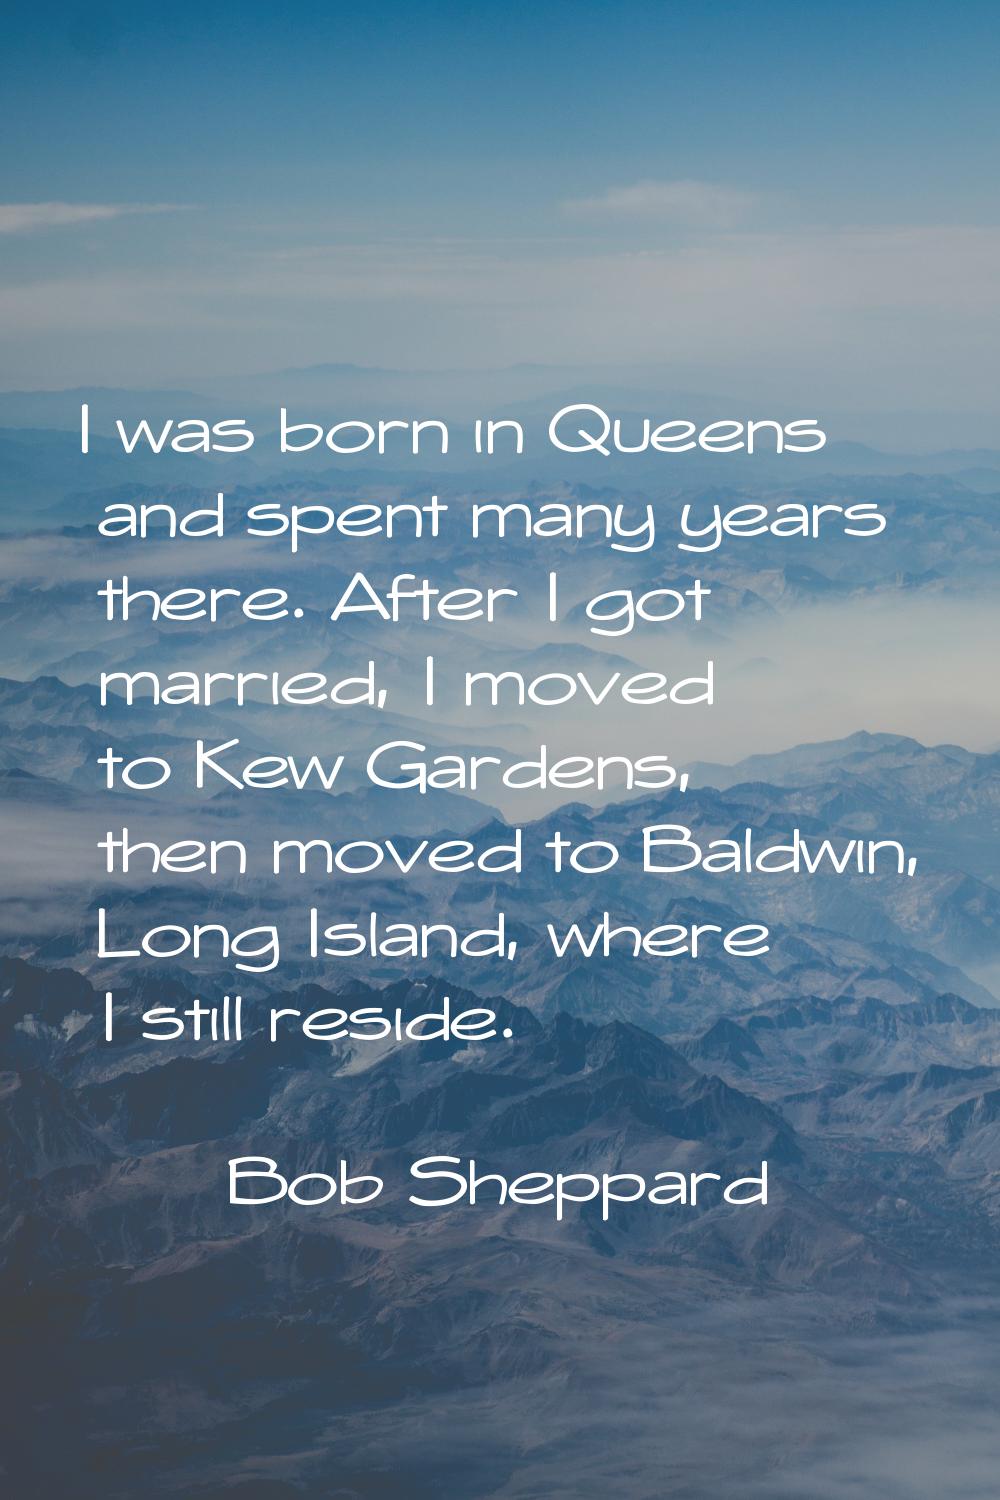 I was born in Queens and spent many years there. After I got married, I moved to Kew Gardens, then 